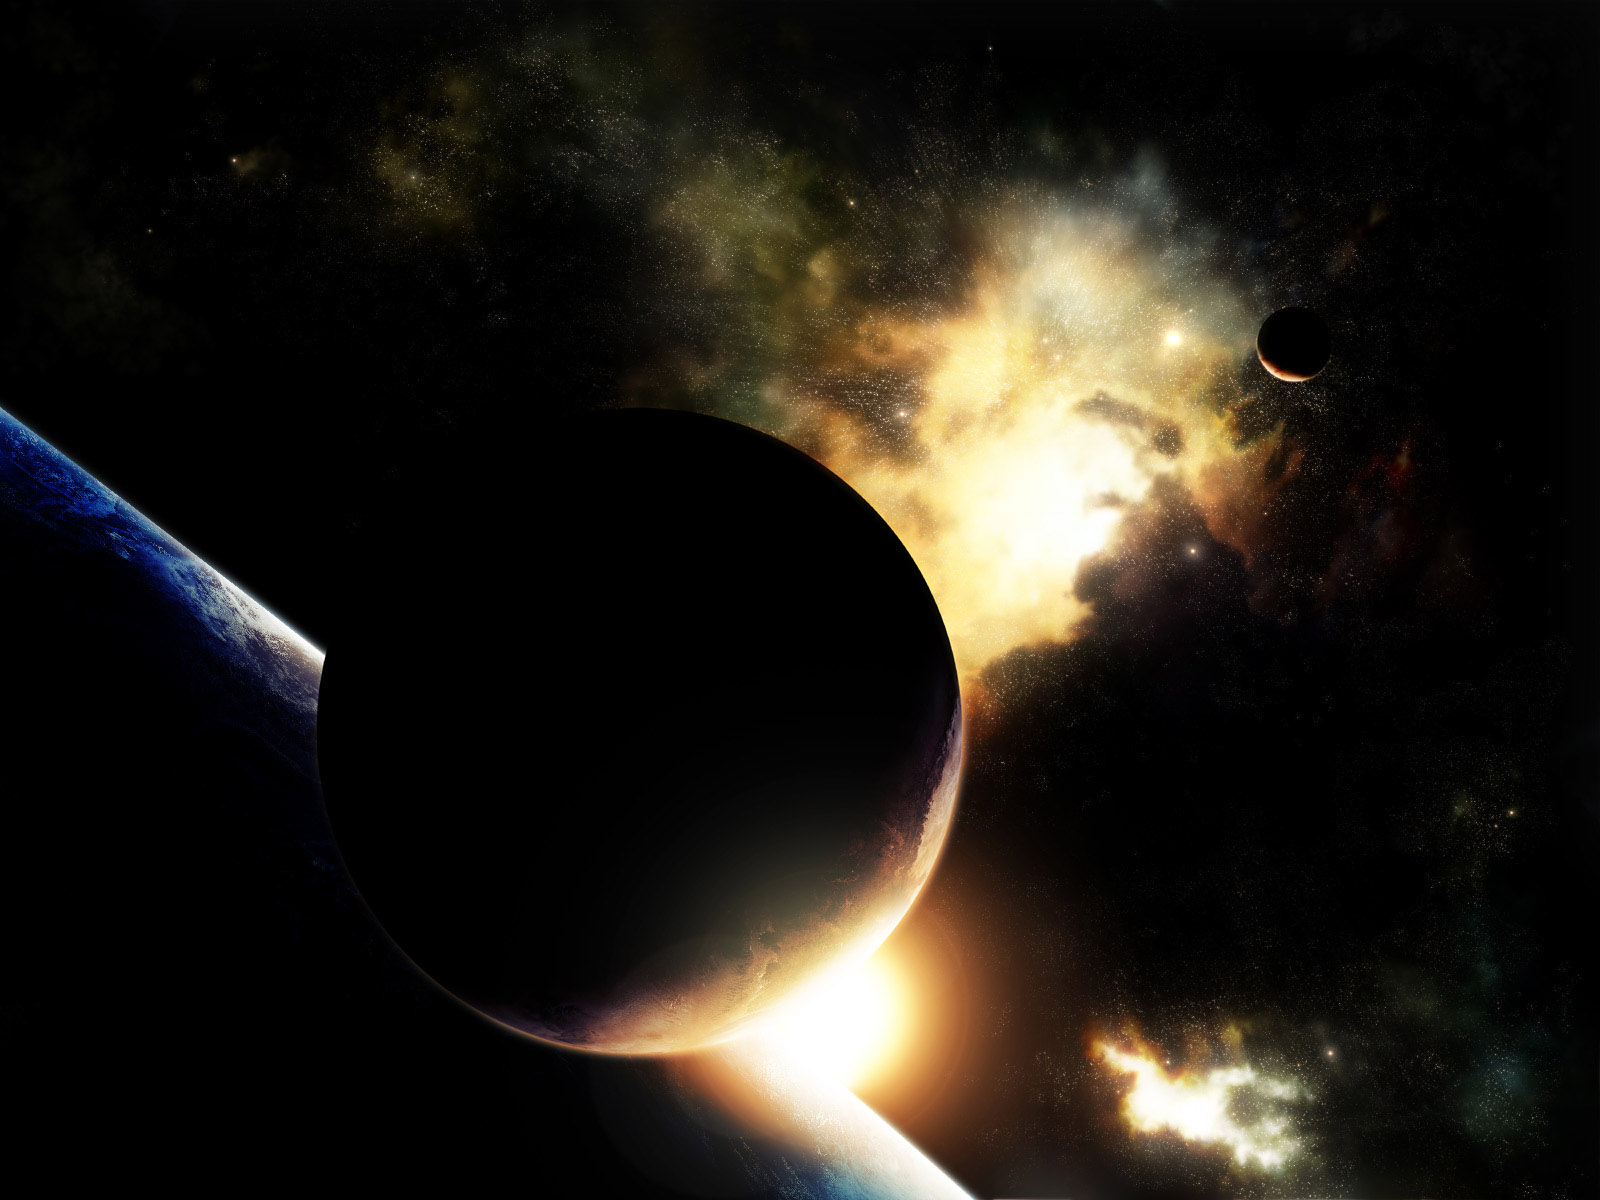 The Dark Space - Abstract Outer Space Wallpaper Hd - HD Wallpaper 